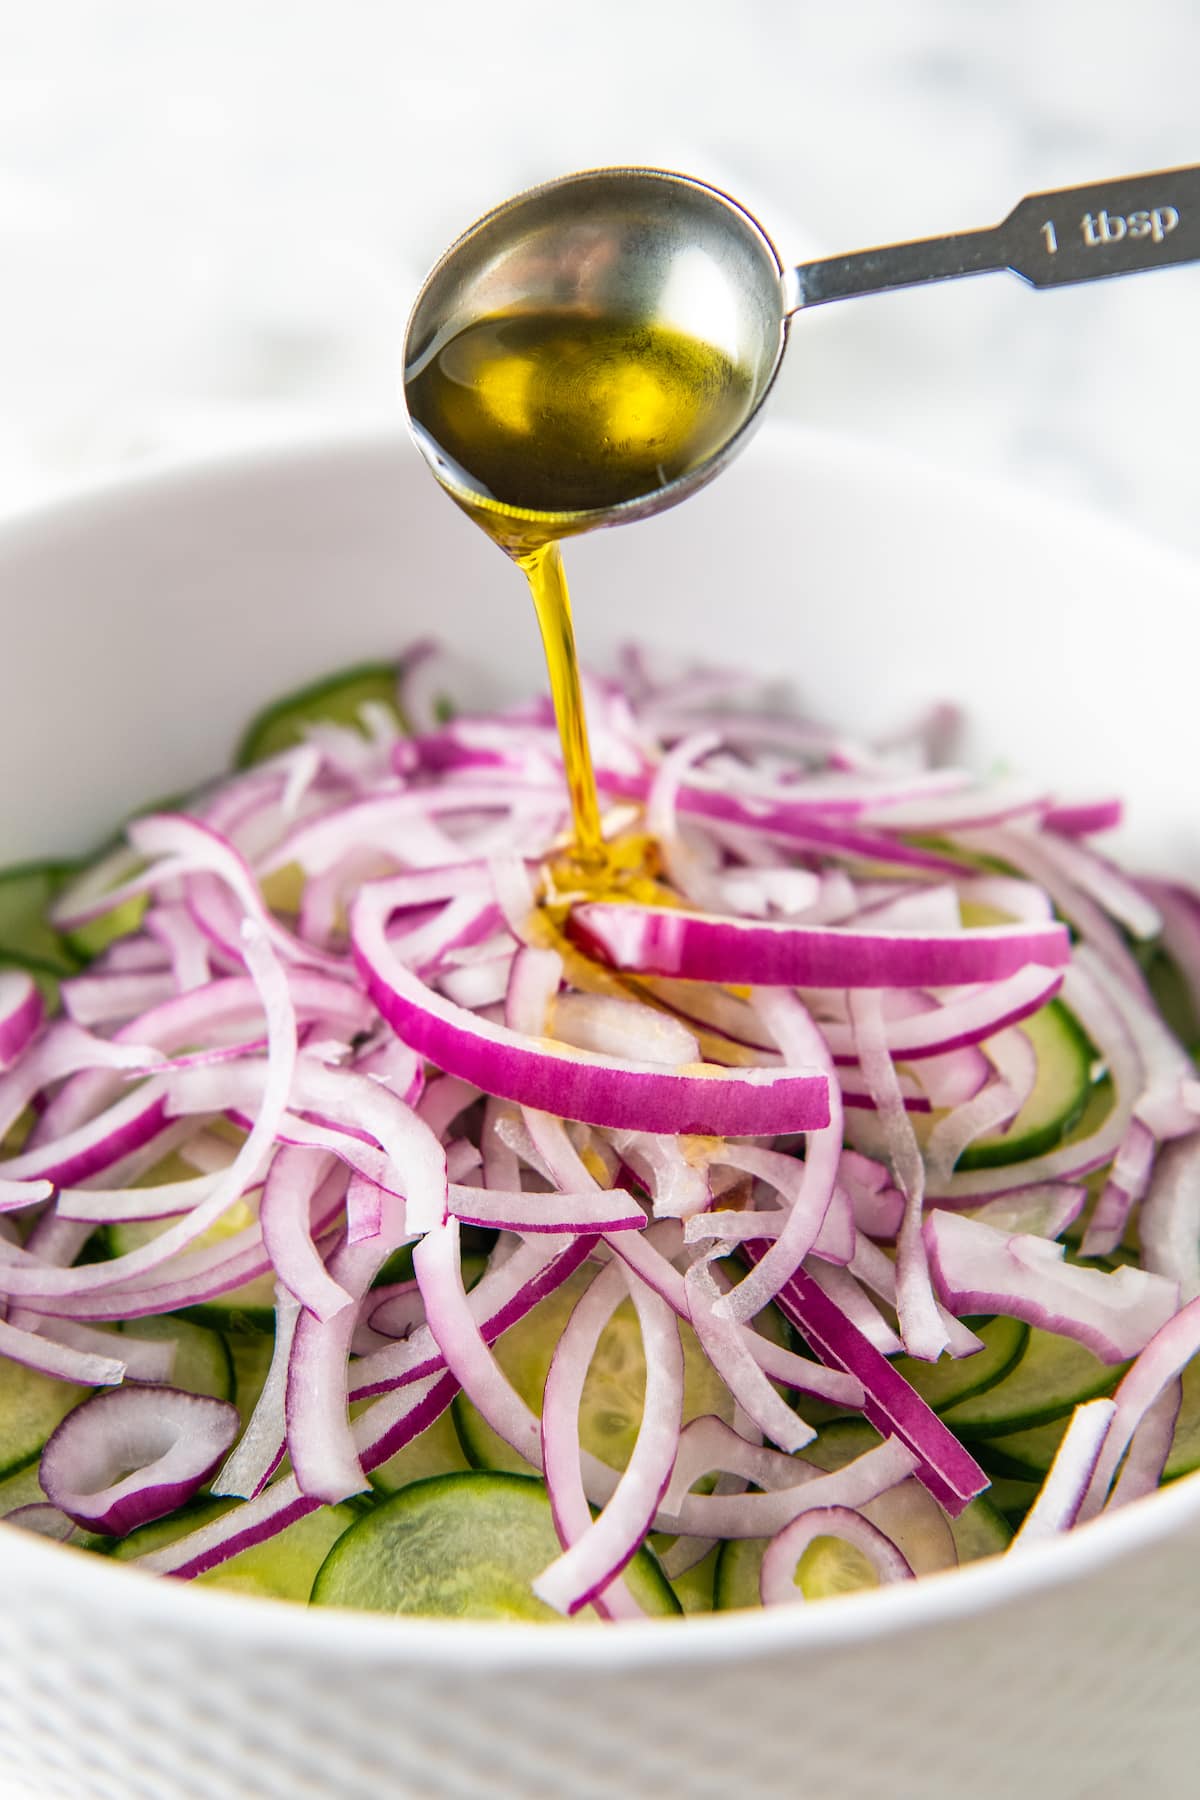 Olive oil being poured over a bowl of sliced cucumbers and red onions.